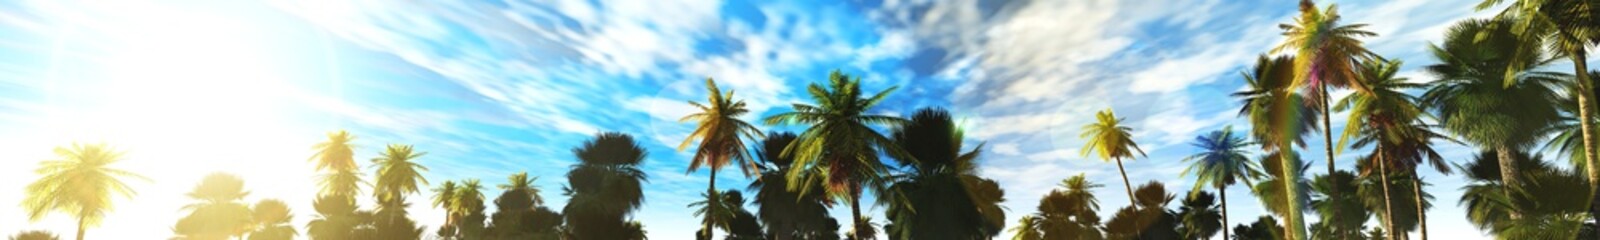 Fototapeta na wymiar palm grove, panorama, 3D rendering. Palm trees against the blue sky with clouds. 